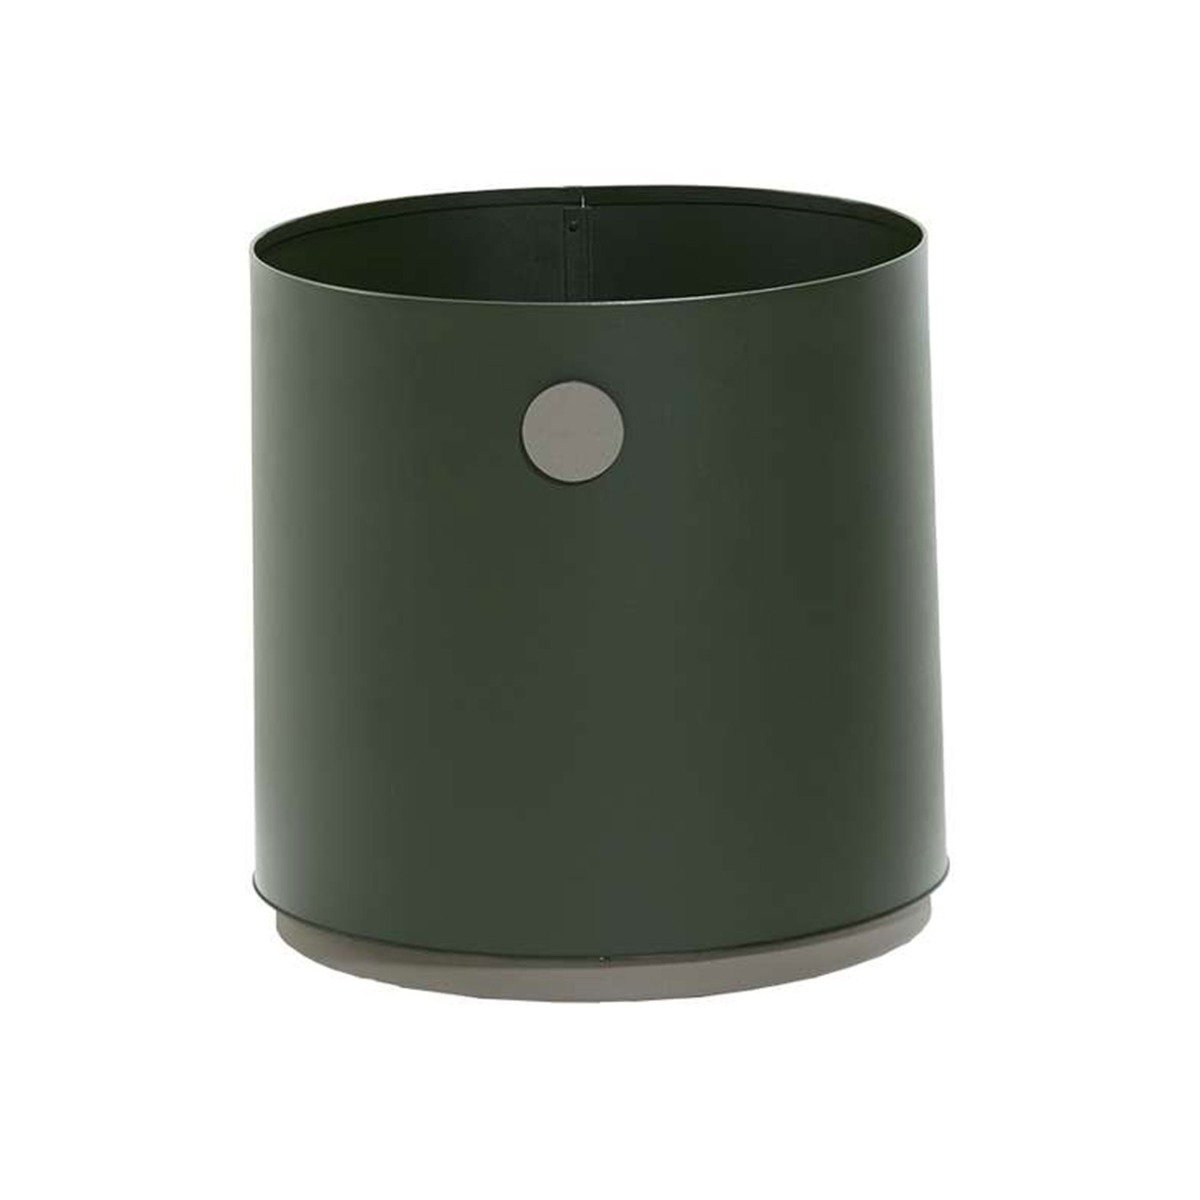 Cane Line Grow Small Planter, Green | Barker & Stonehouse